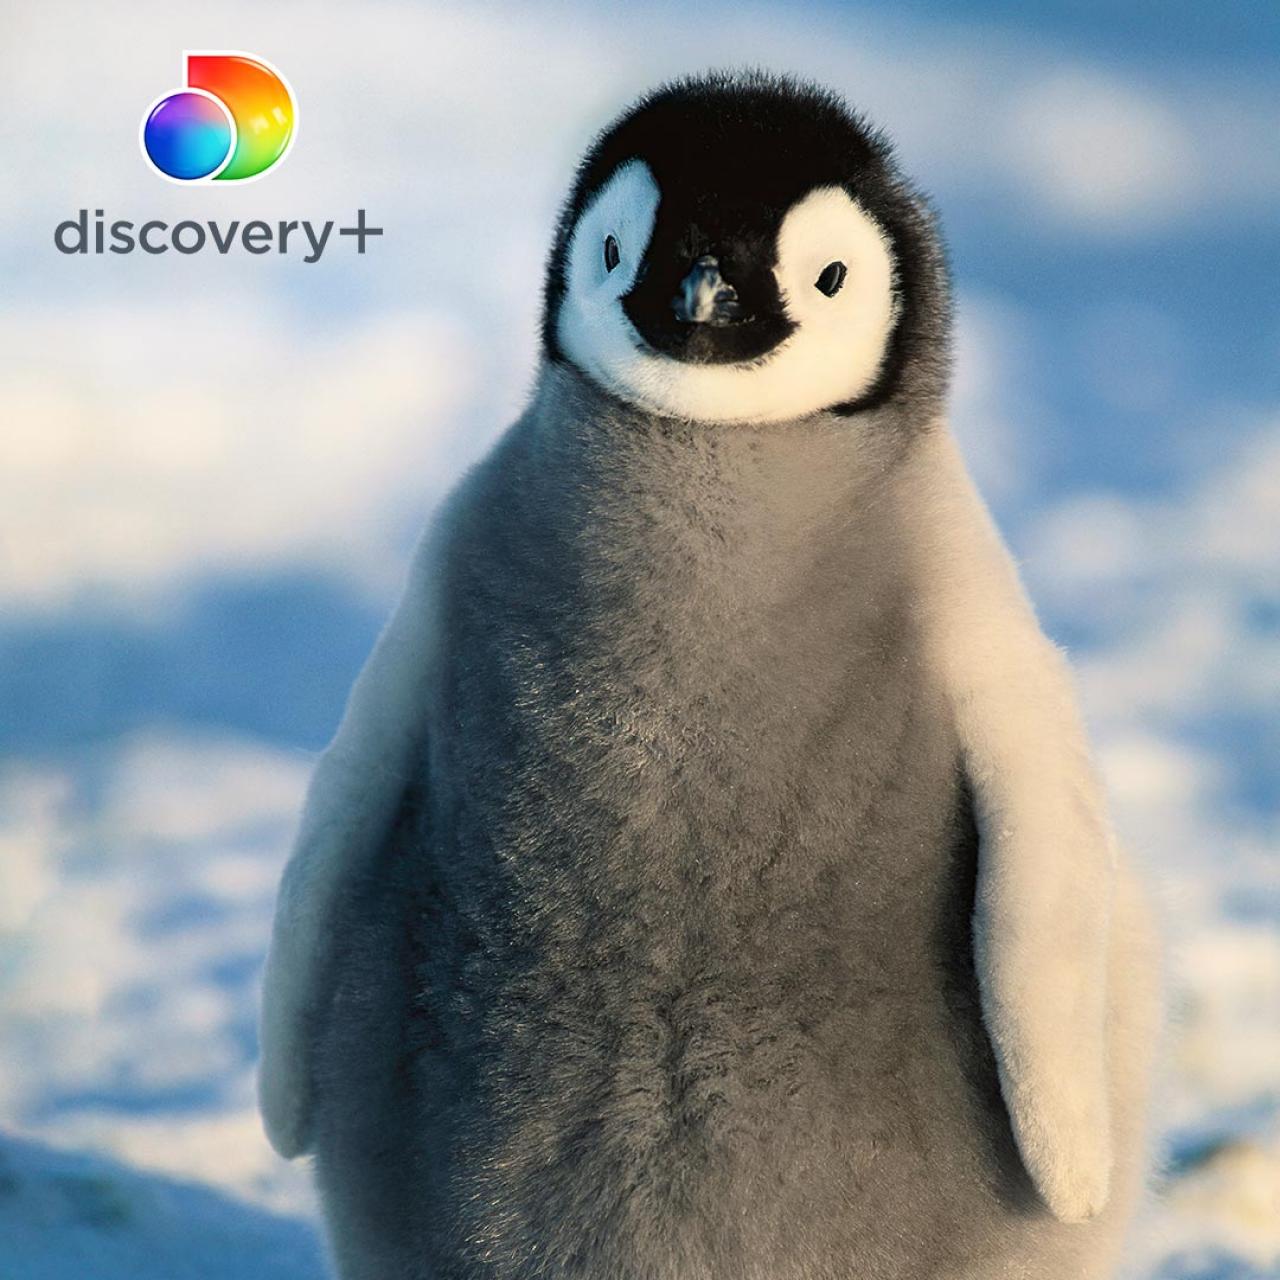 Stream the Best of Discovery including Natural History Shows on discovery+ | DNews Discovery